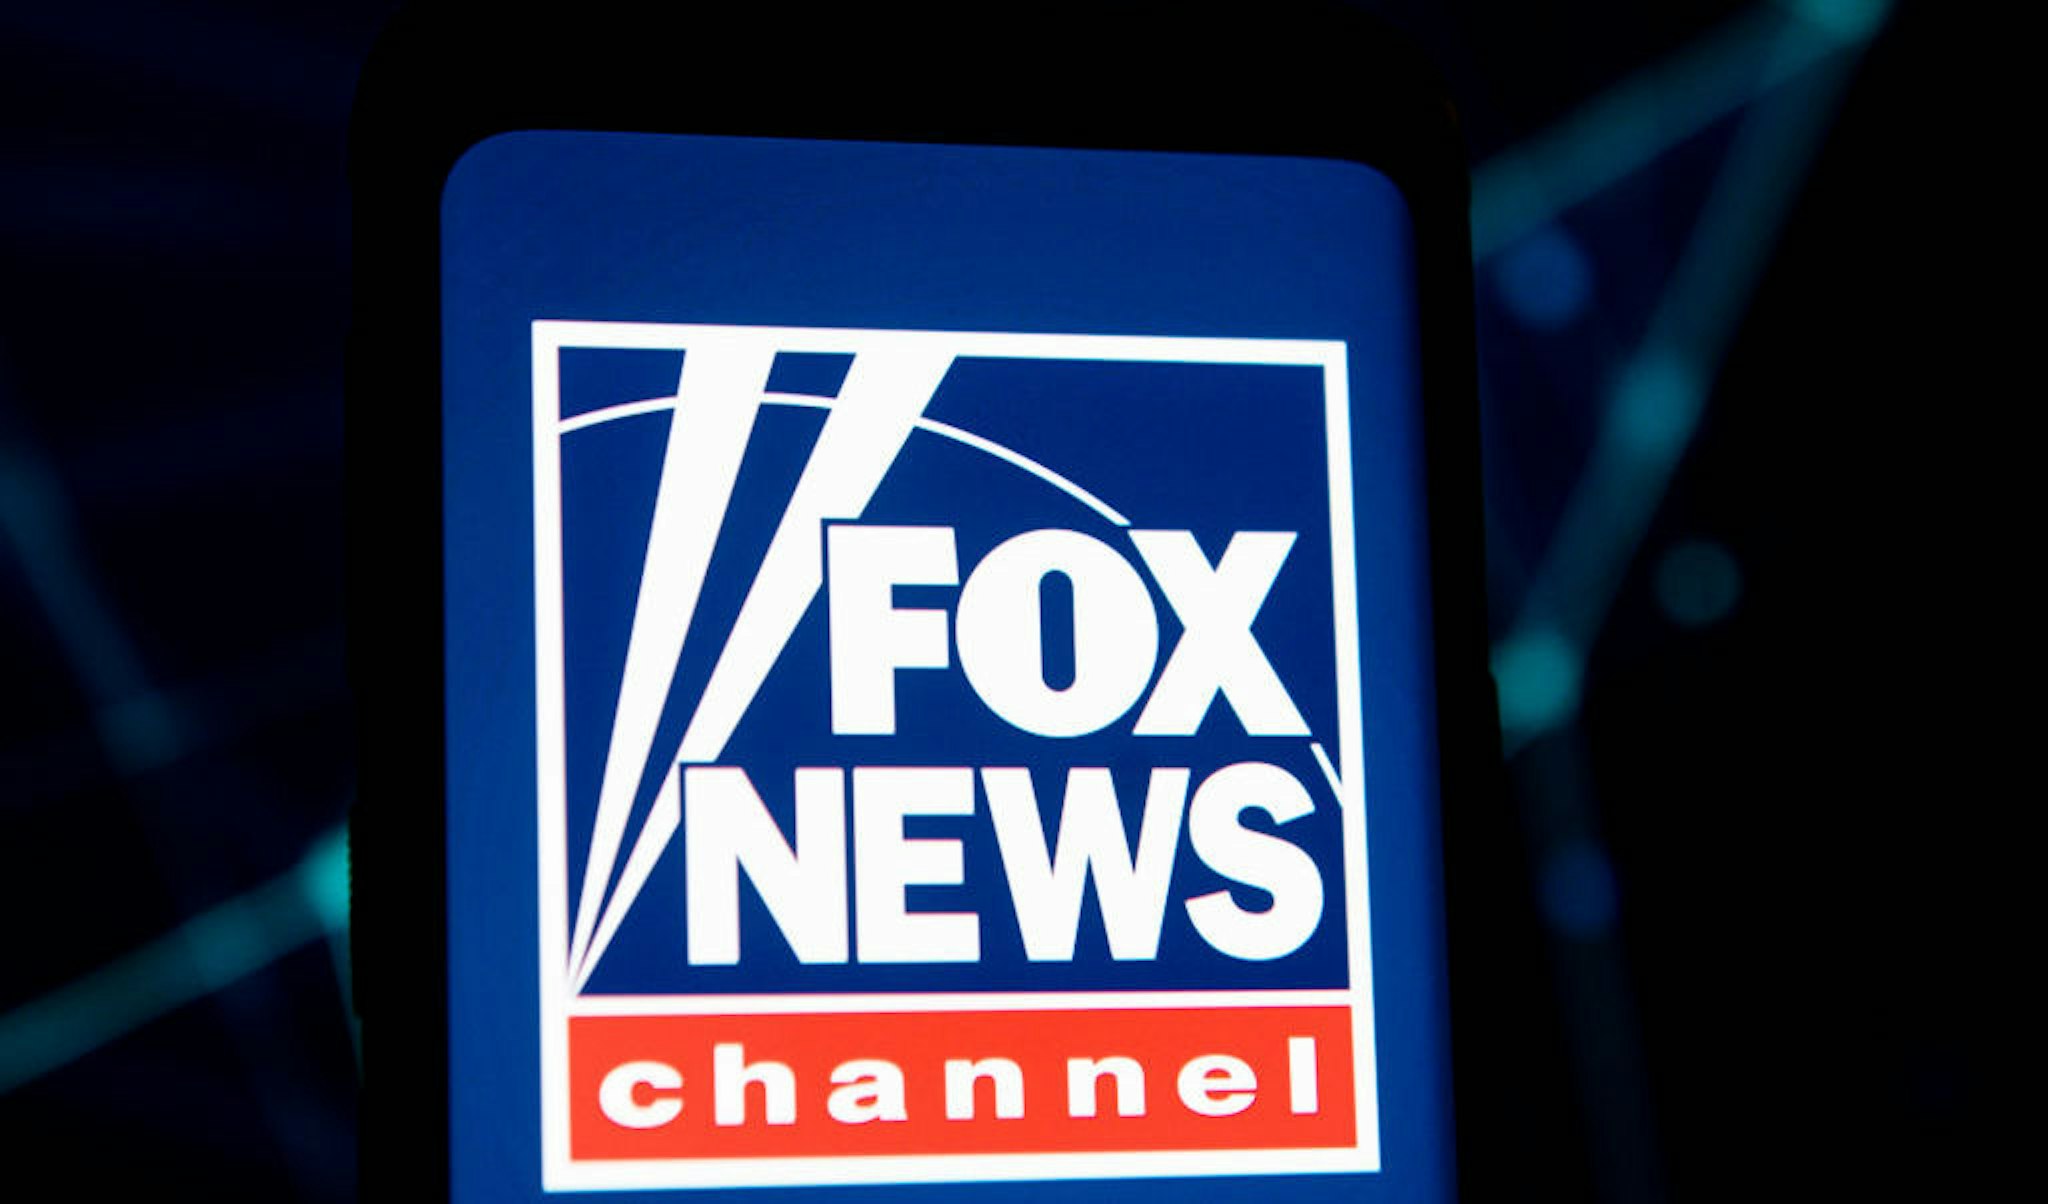 POLAND - 2020/03/23: In this photo illustration a Fox News Channel logo seen displayed on a smartphone. (Photo Illustration by Mateusz Slodkowski/SOPA Images/LightRocket via Getty Images)